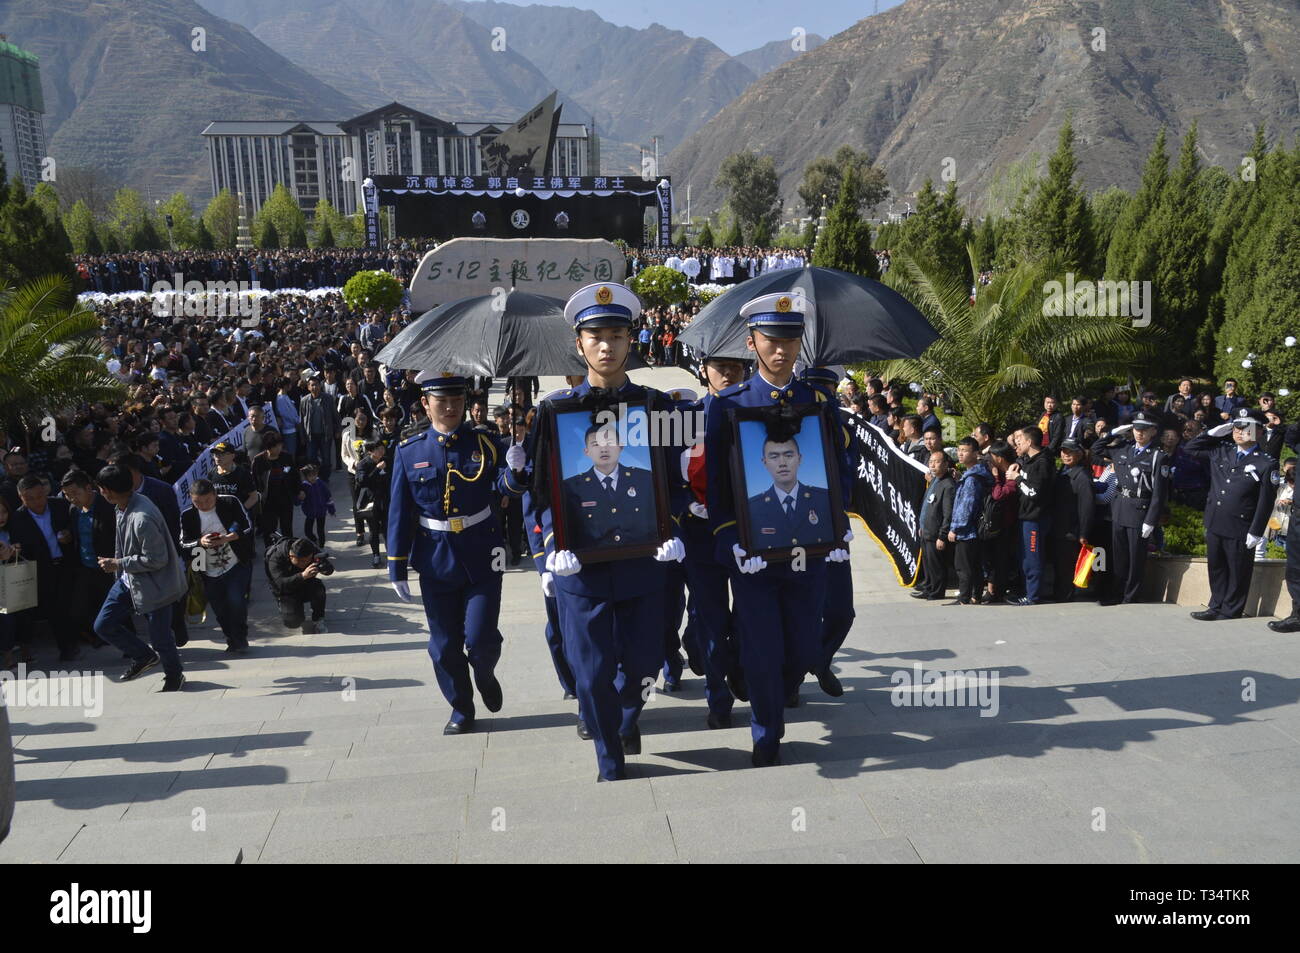 Longnan, China's Gansu Province. 6th Apr, 2019. A ceremony is held to receive the bone ashes of firemen Guo Qi and Wang Fojun, who died while fighting a forest fire in southwest China's Sichuan Province, in Longnan, northwest China's Gansu Province, April 6, 2019. The bone ashes of firemen Guo Qi and Wang Fojun returned to their hometown of Longnan in Gansu Province on Saturday. Credit: Zhang Fan/Xinhua/Alamy Live News Stock Photo